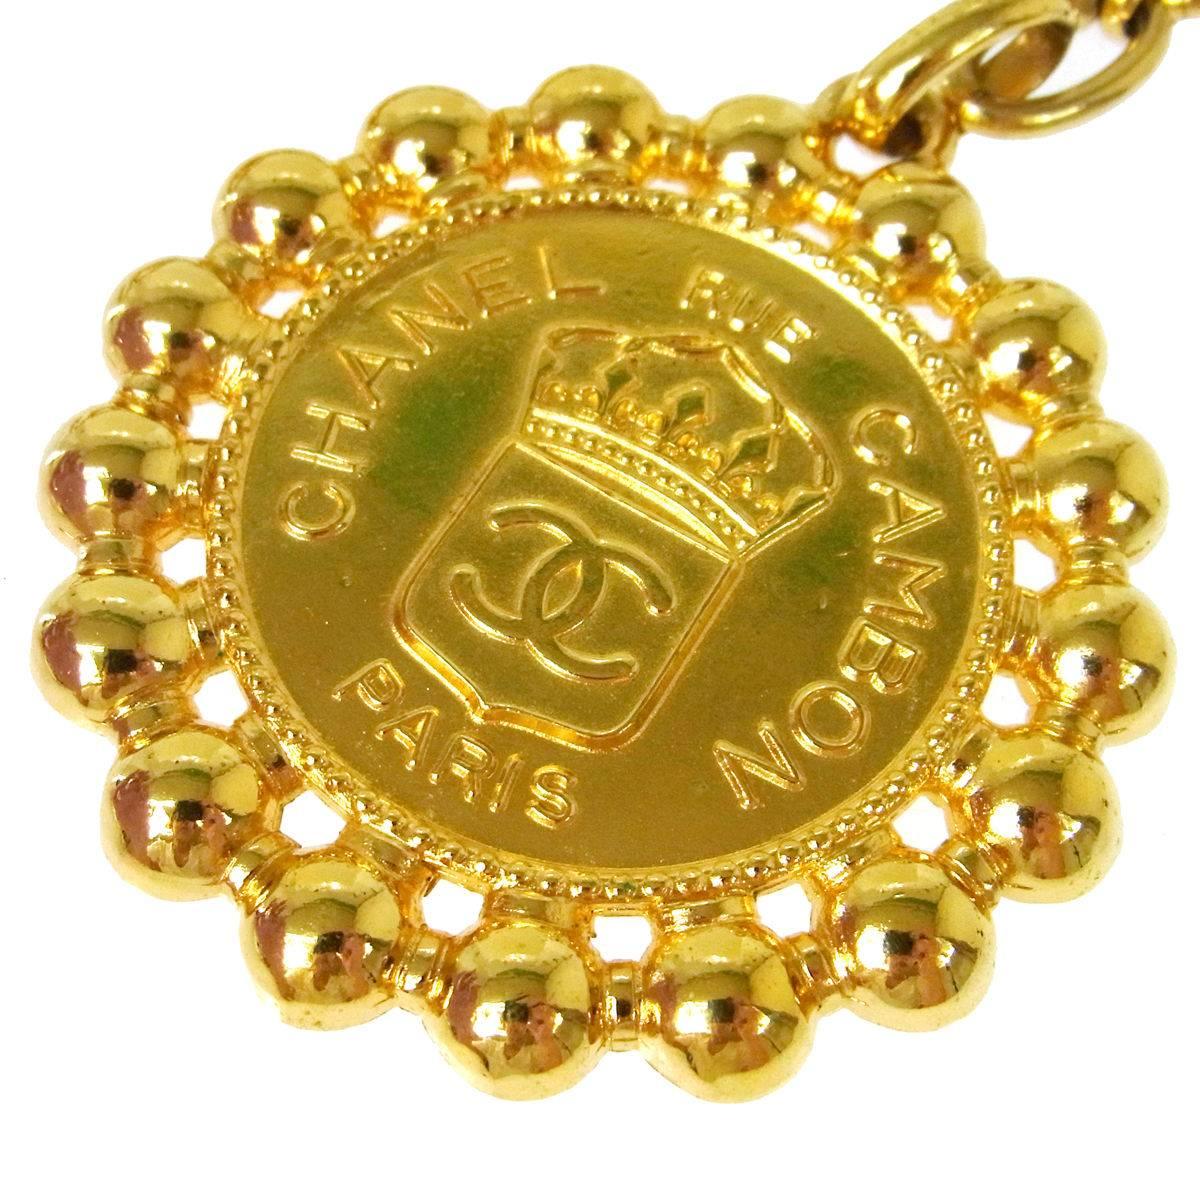 Chanel Vintage Gold Large Round Coin Charm Rue Cambon Pendant Evening Necklace

Metal
Gold tone
Lobster claw closure
Charm diameter 3